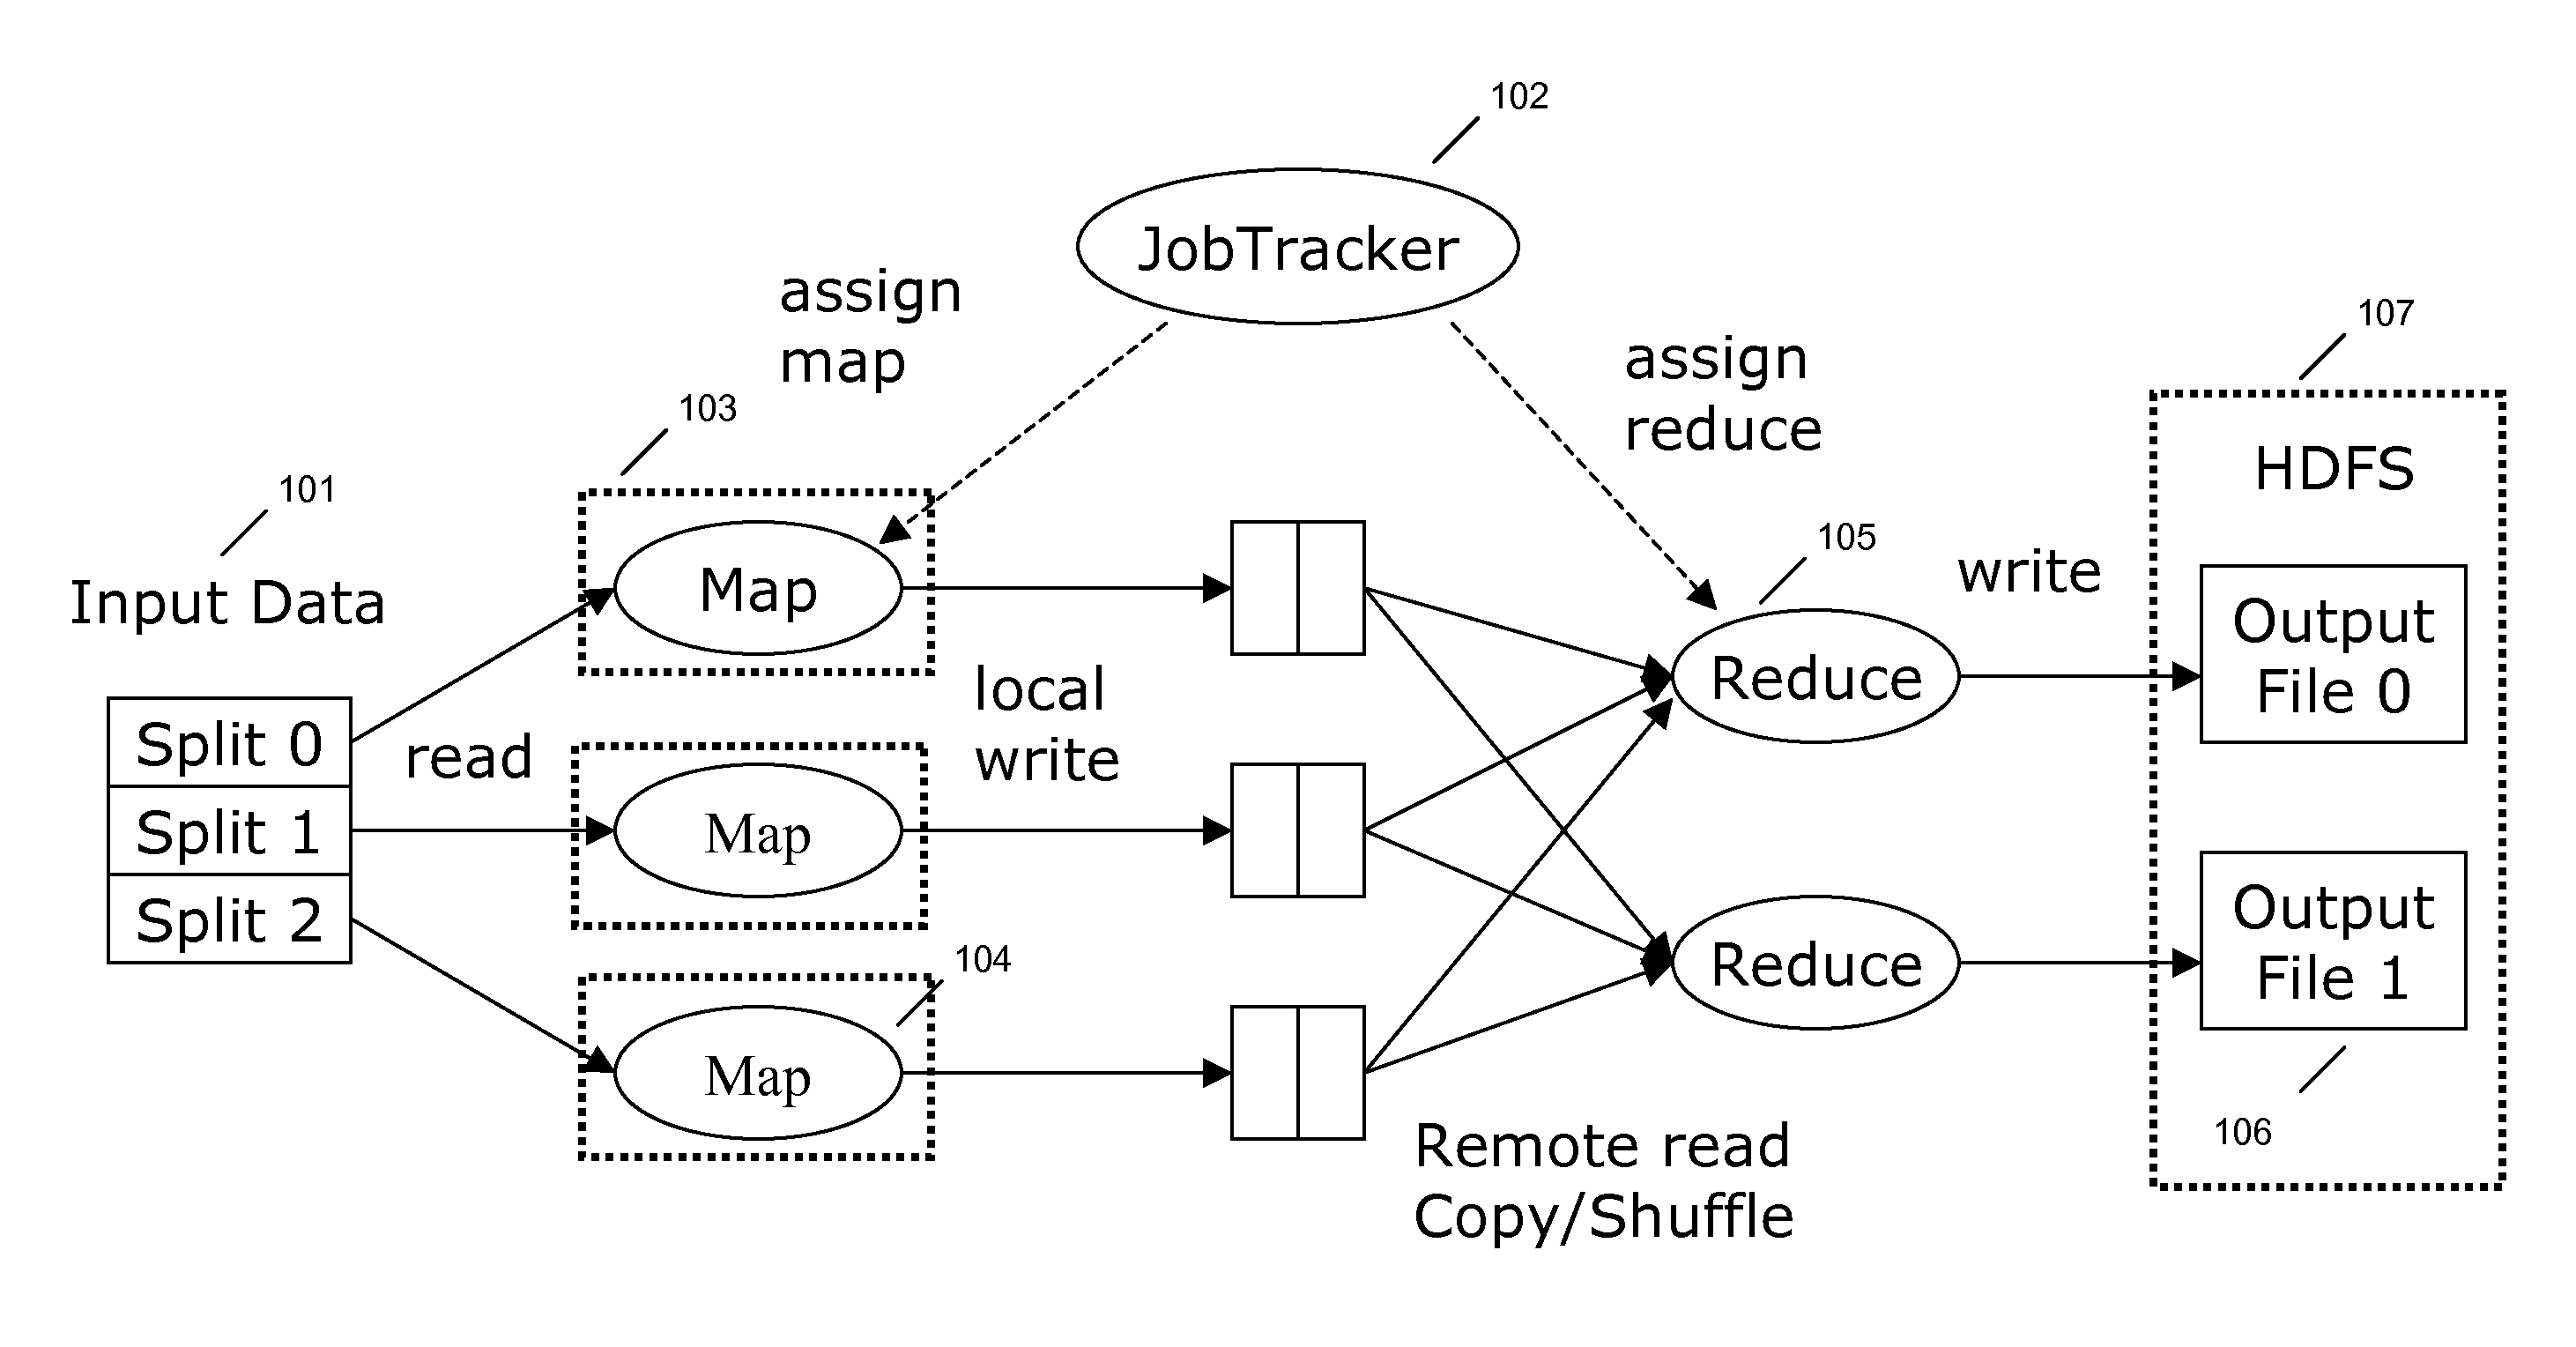 Resource aware scheduling in a distributed computing environment